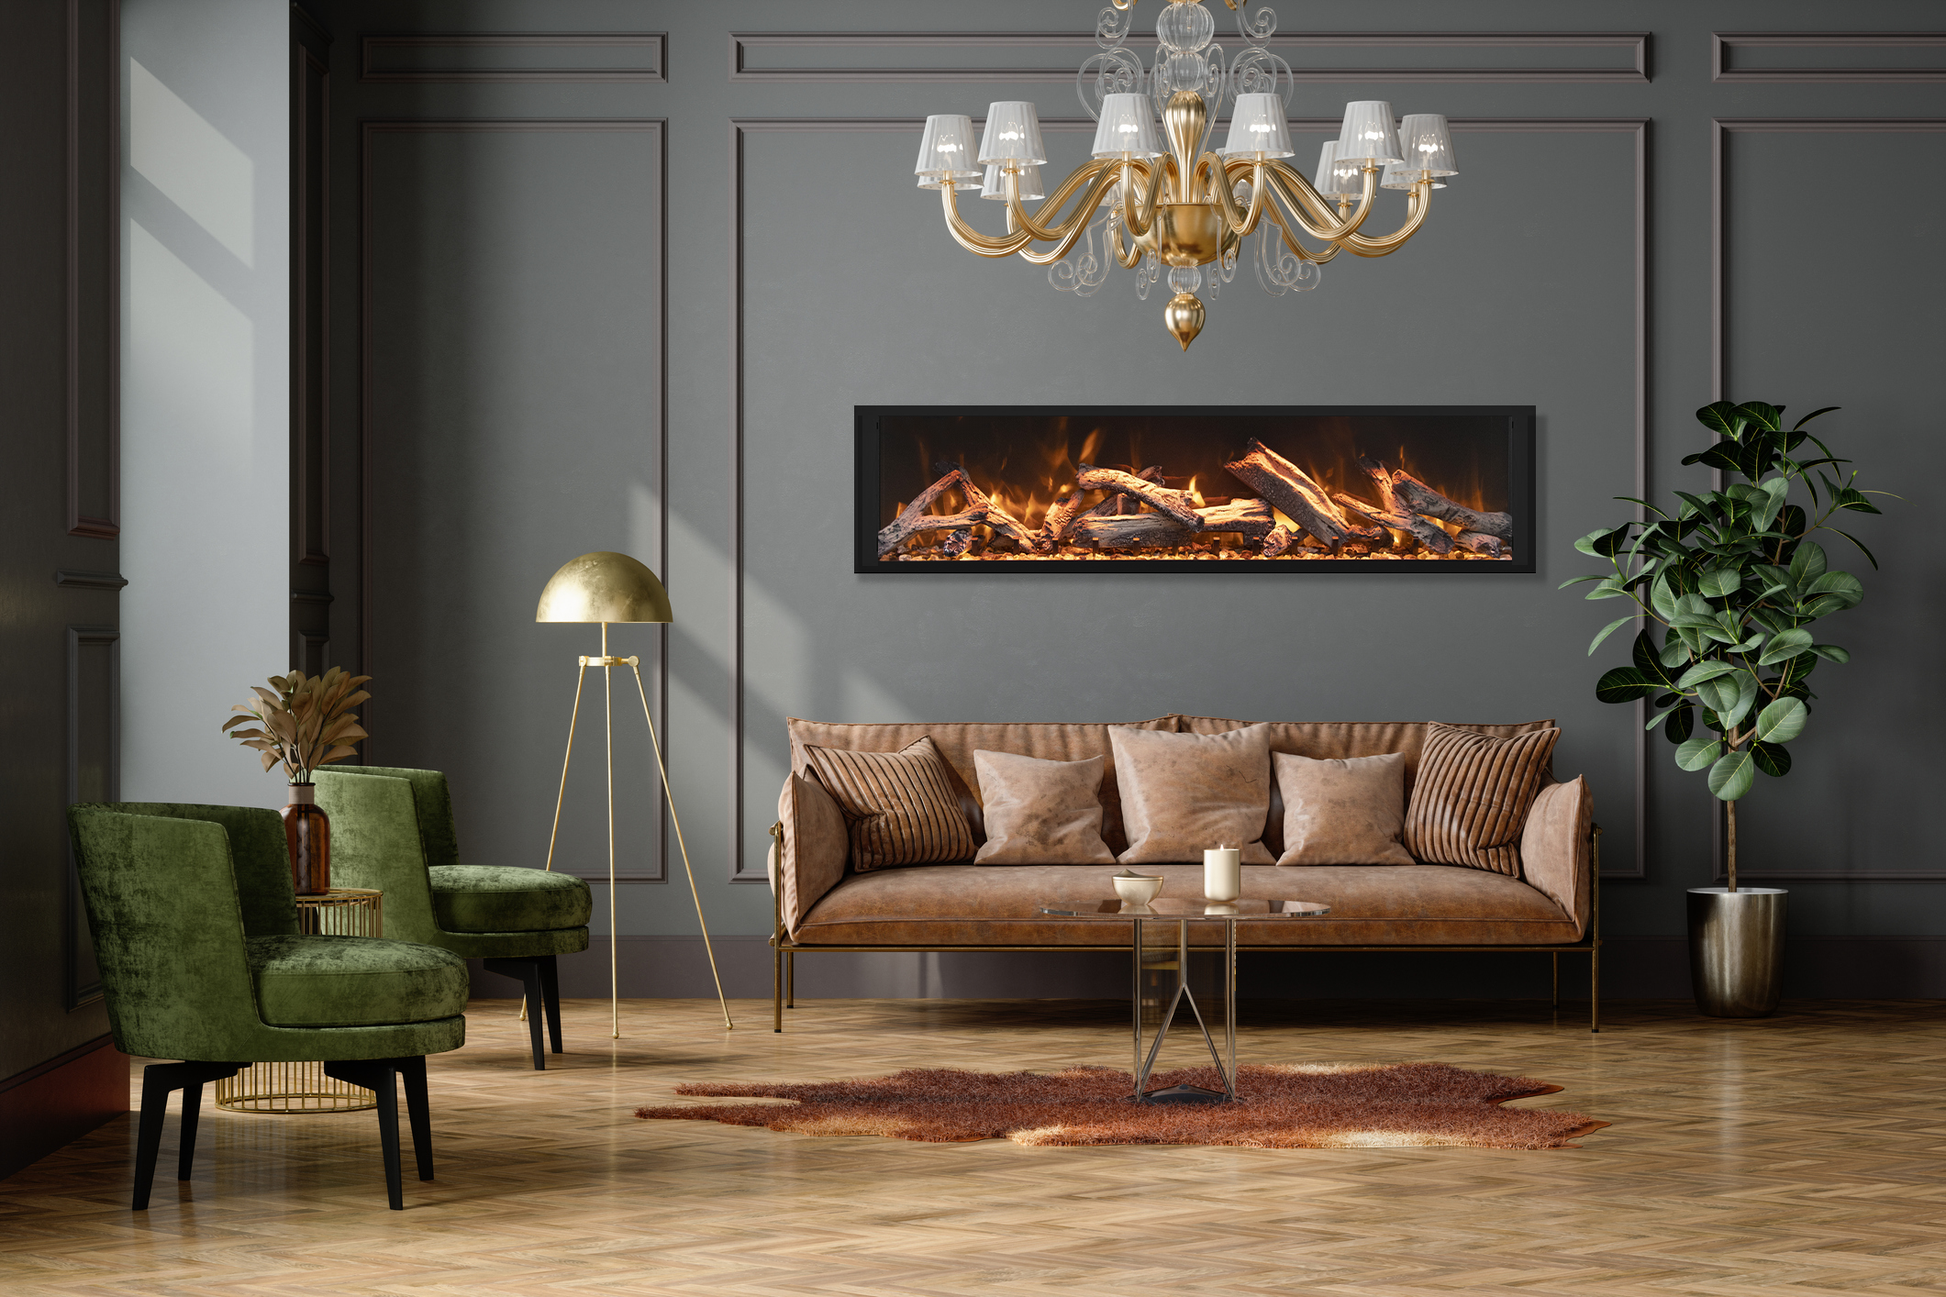 Extra Tall Electric Fireplace | Remii | Indoor | Outdoor | 2 Stage Heater | Buy Fireplaces Online